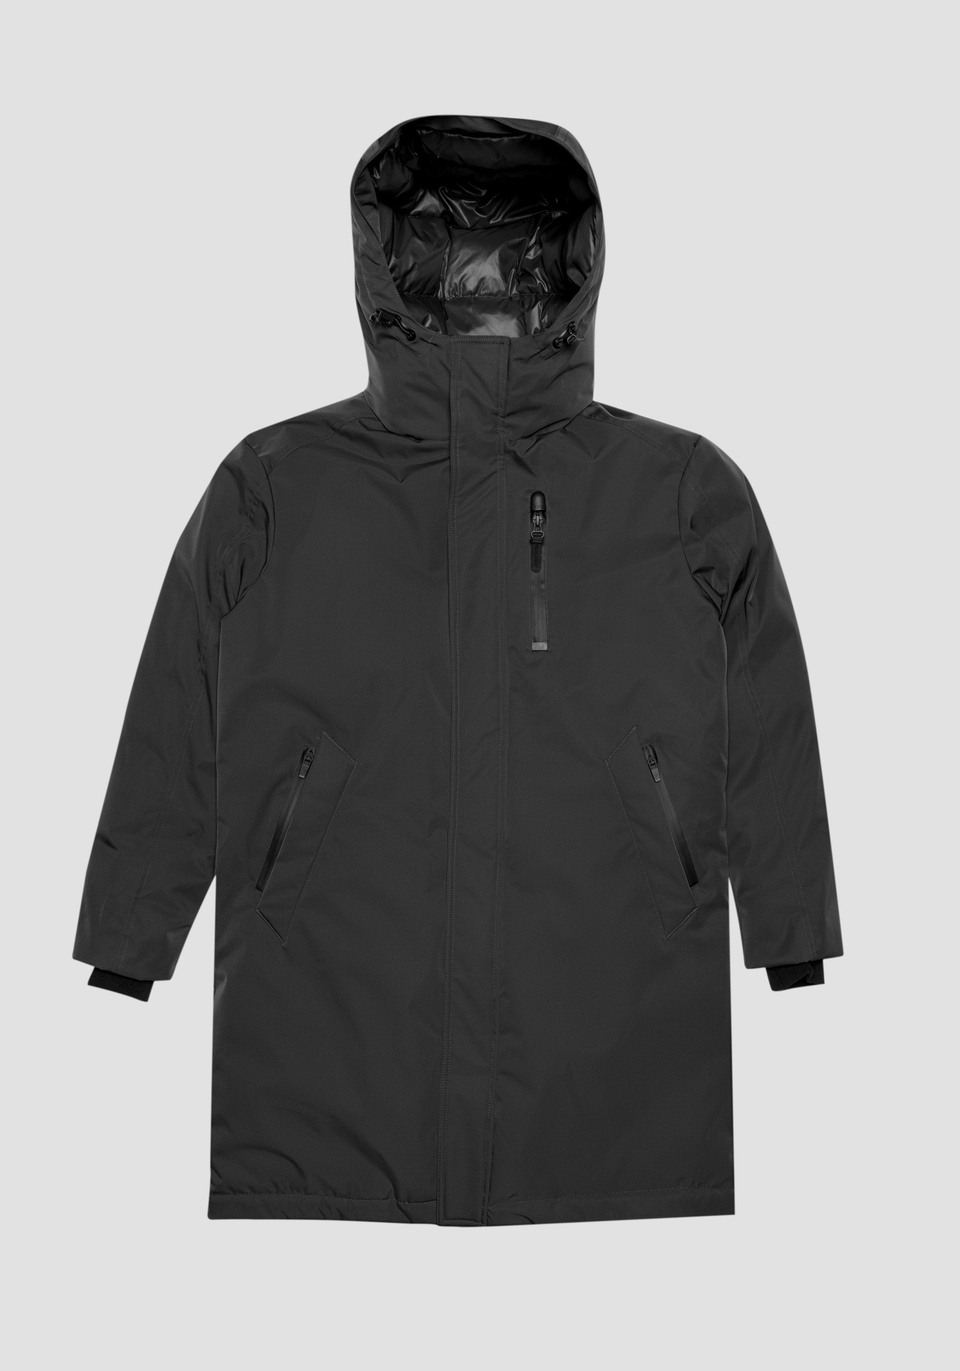 REGULAR FIT JACKET WITH HOOD IN TECHNICAL FABRIC WITH ECO-SUSTAINABLE PADDING - Antony Morato Online Shop